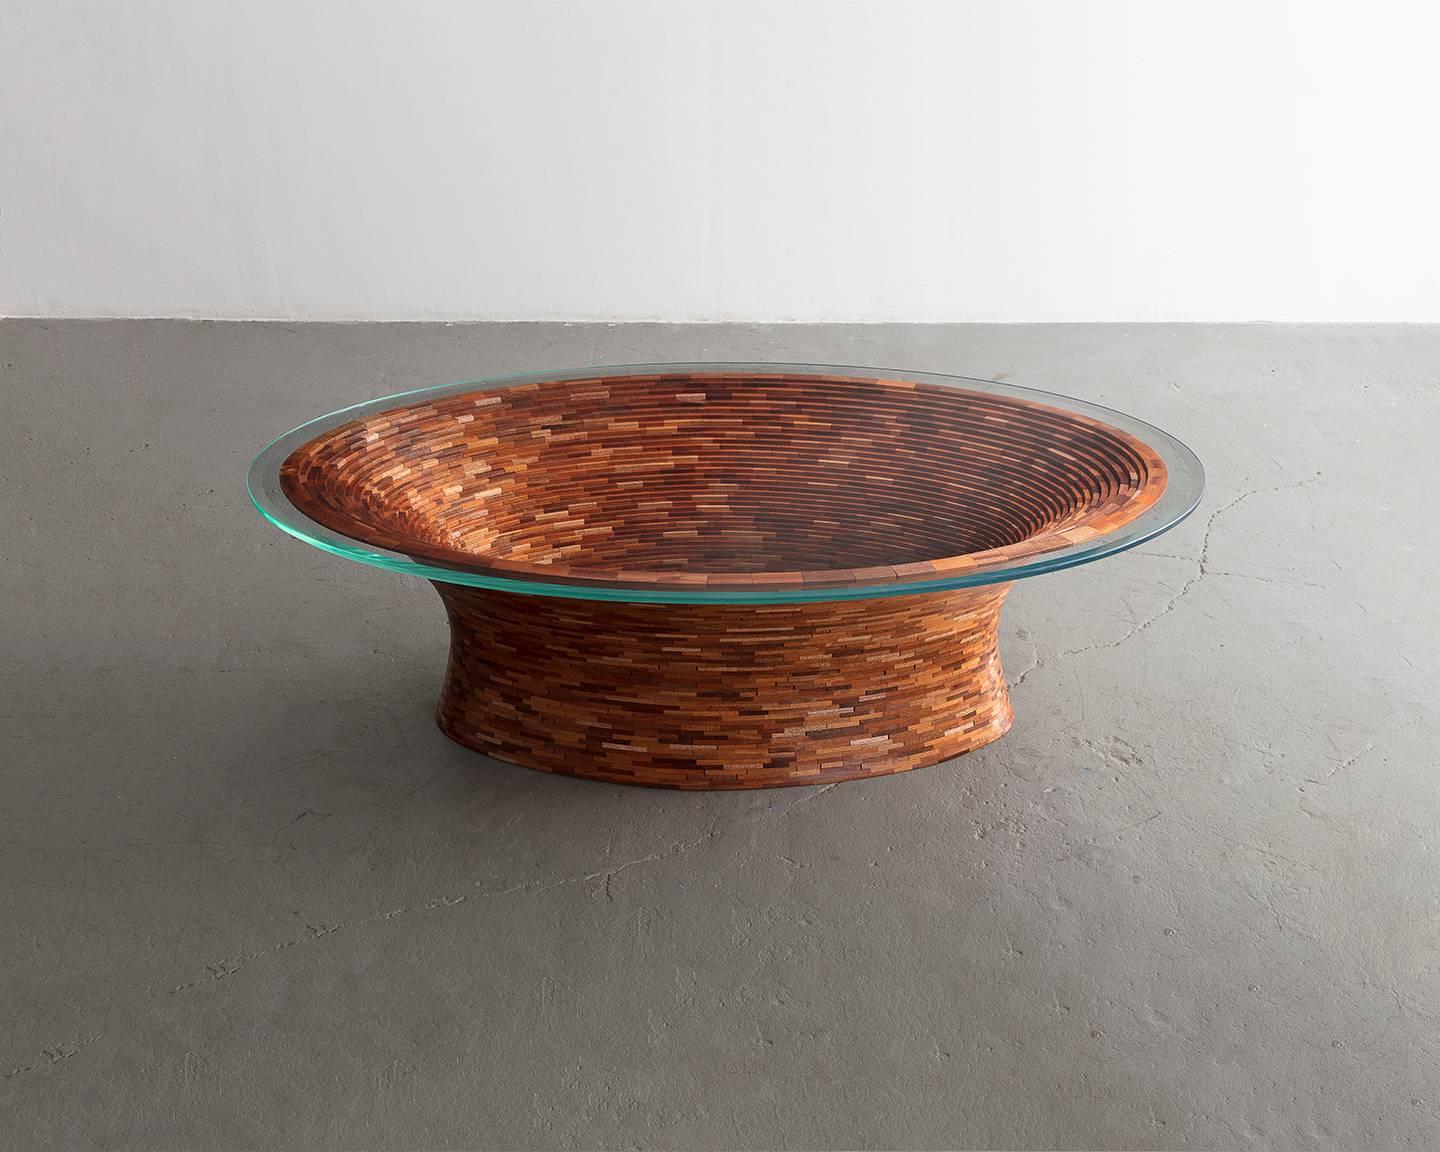 American Customizable Oval Stacked Coffee Table, Richard Haining, Shown Salvaged Mahogany